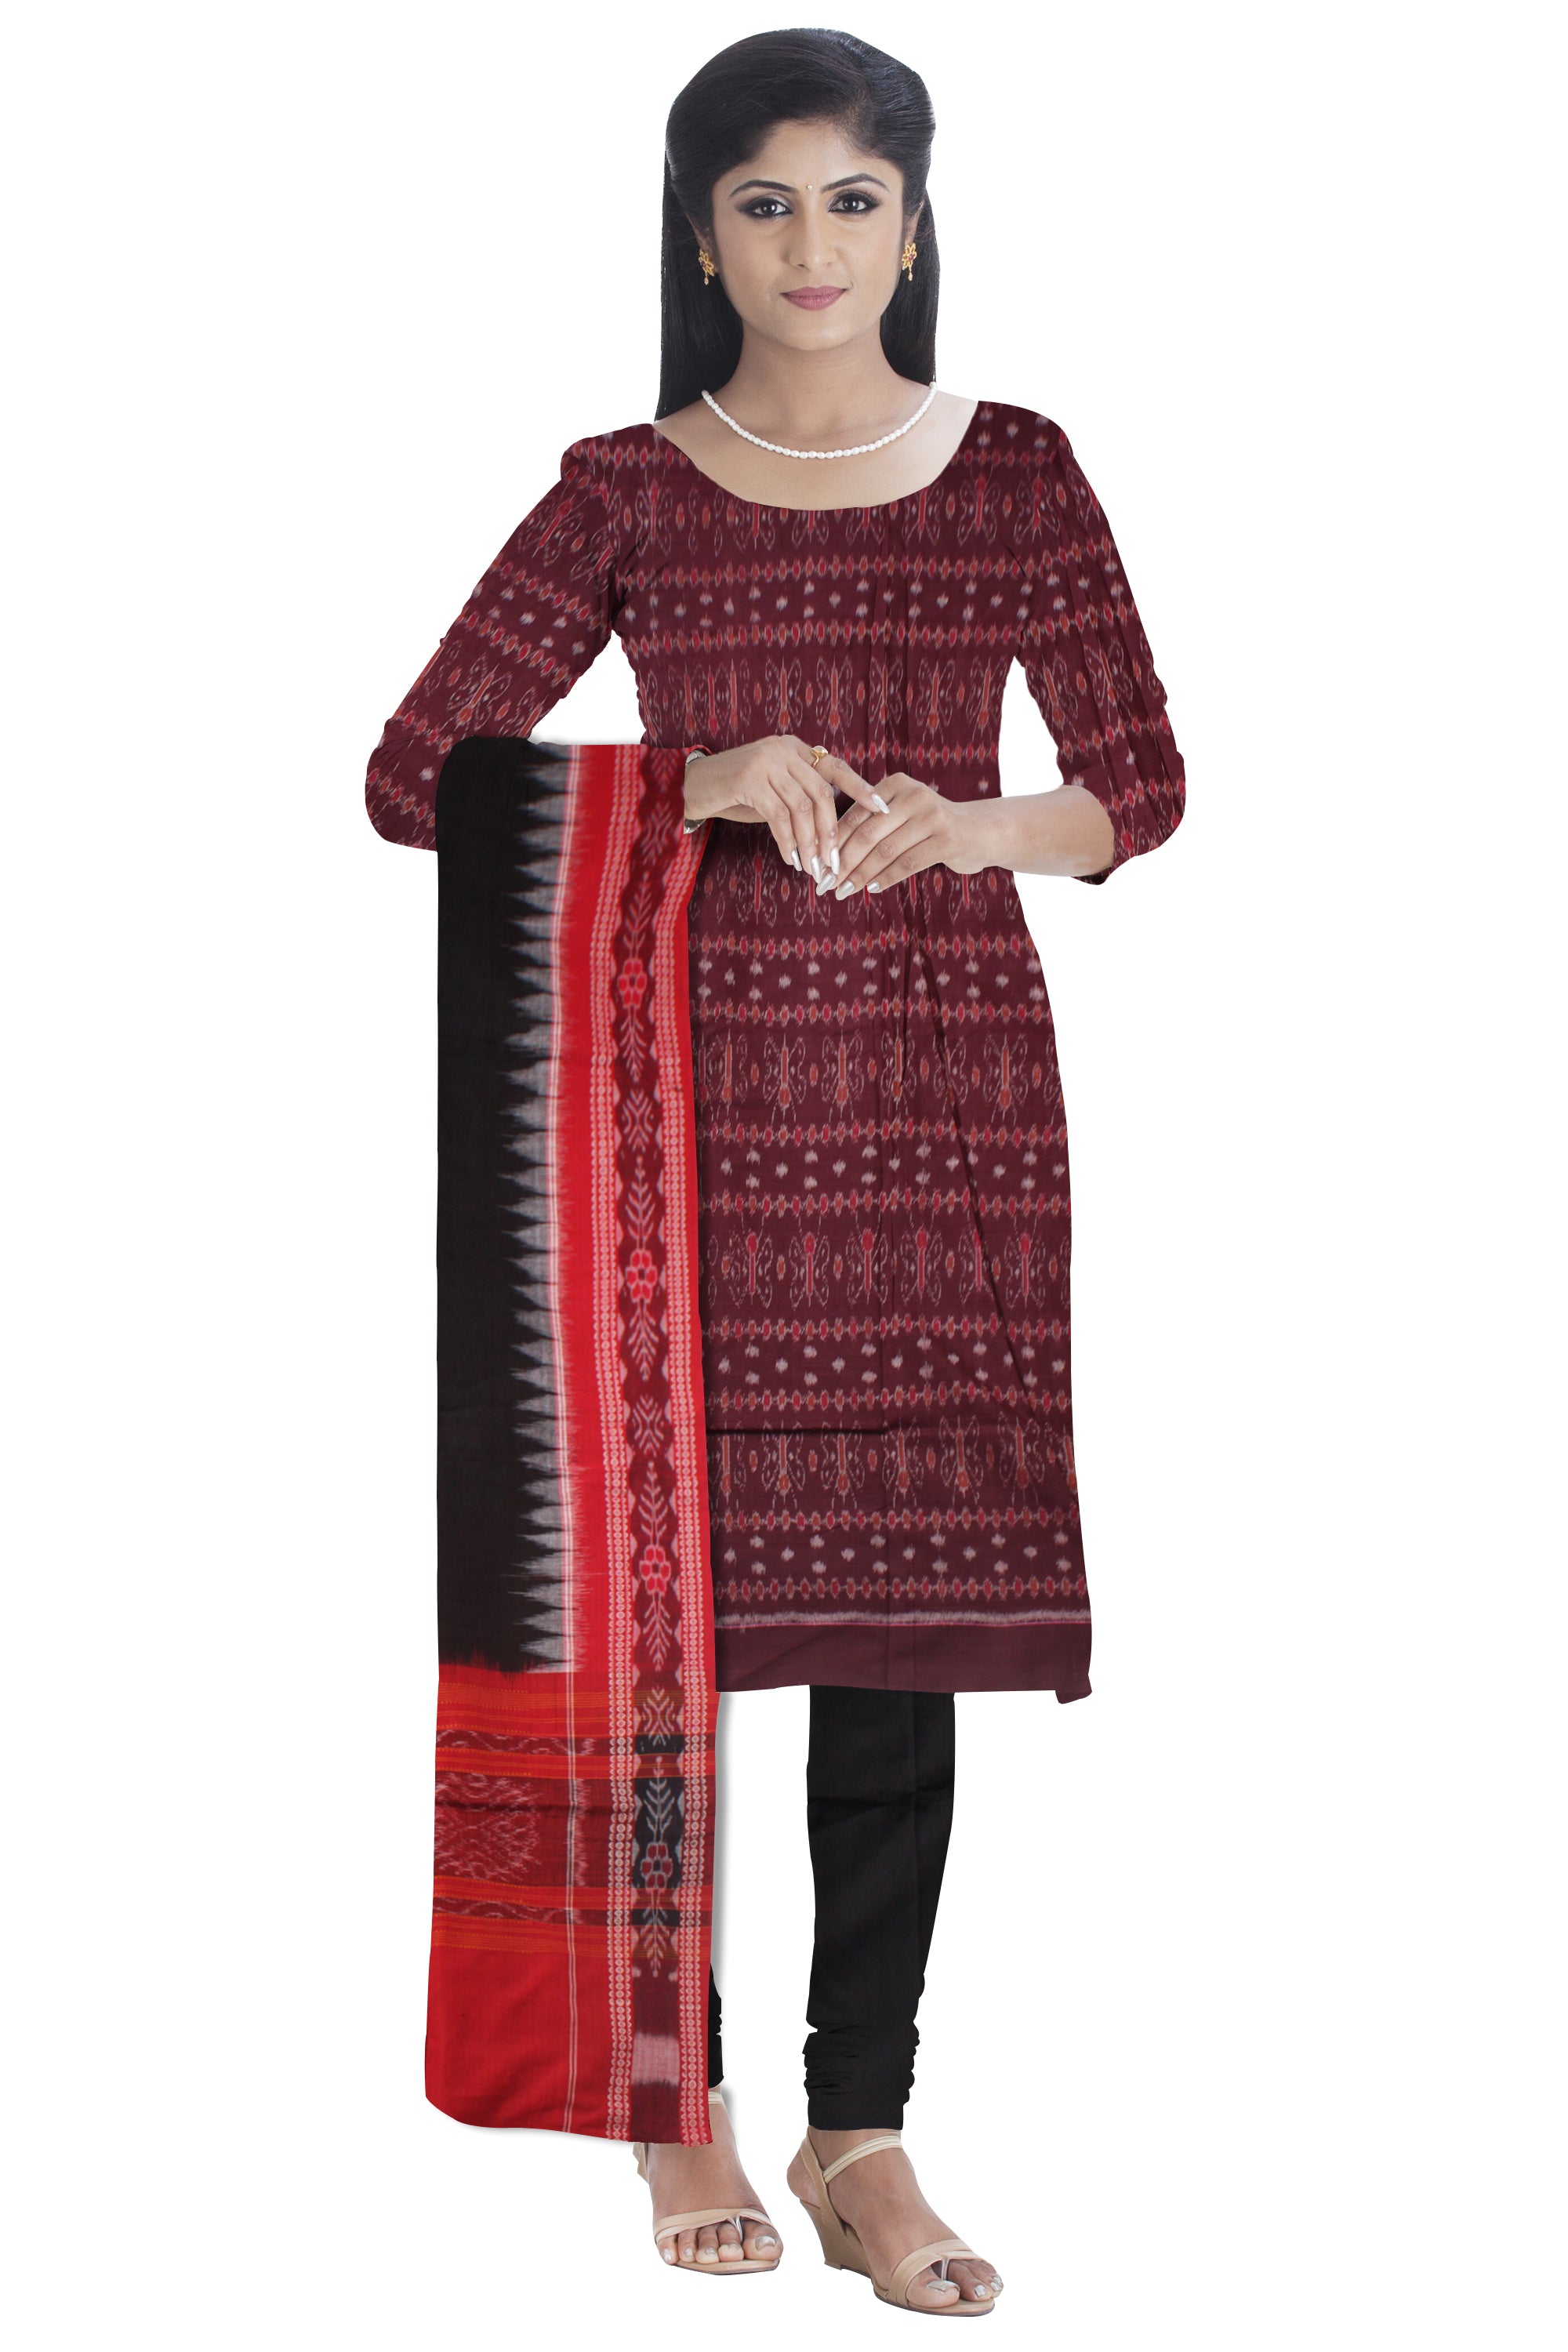 Cotton Dress Material in Beautiful  Coffee, Black and Red color with Pasapali design. Contrast Dupatta  UNSTITCHED DRESS SET - Koshali Arts & Crafts Enterprise